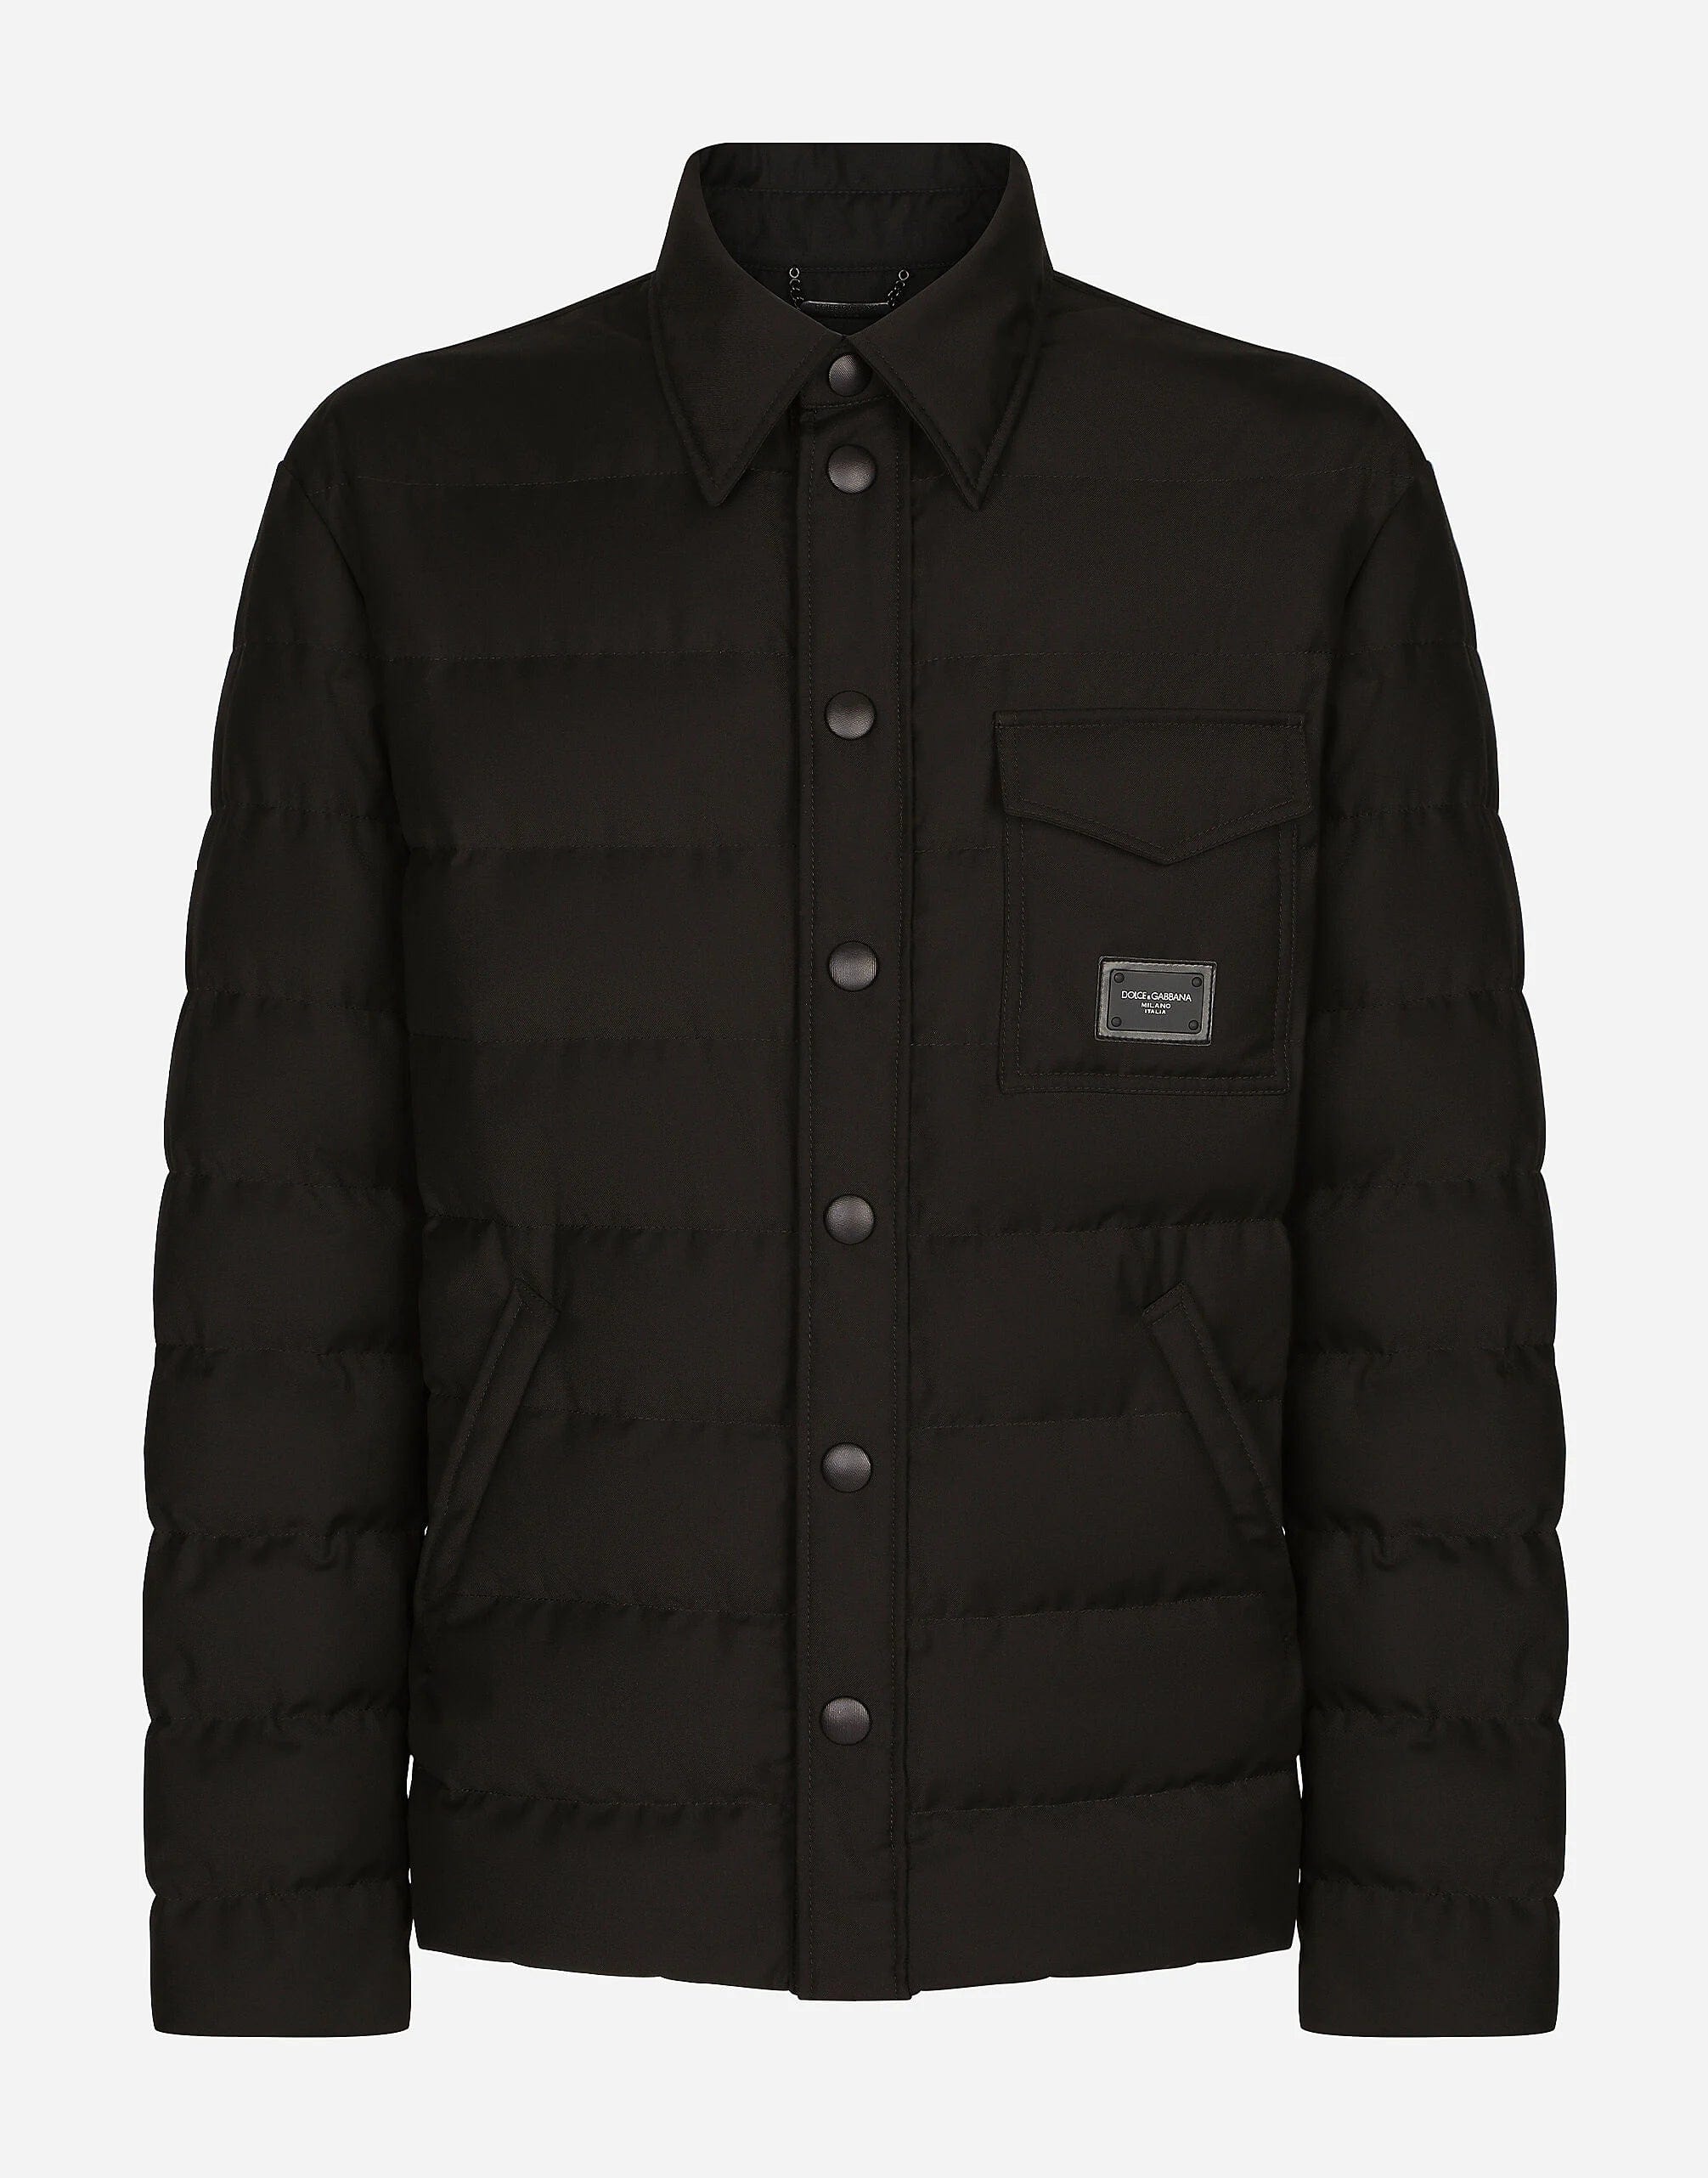 Dolce & Gabbana Quilted Nylon Jacket With Branded Plate